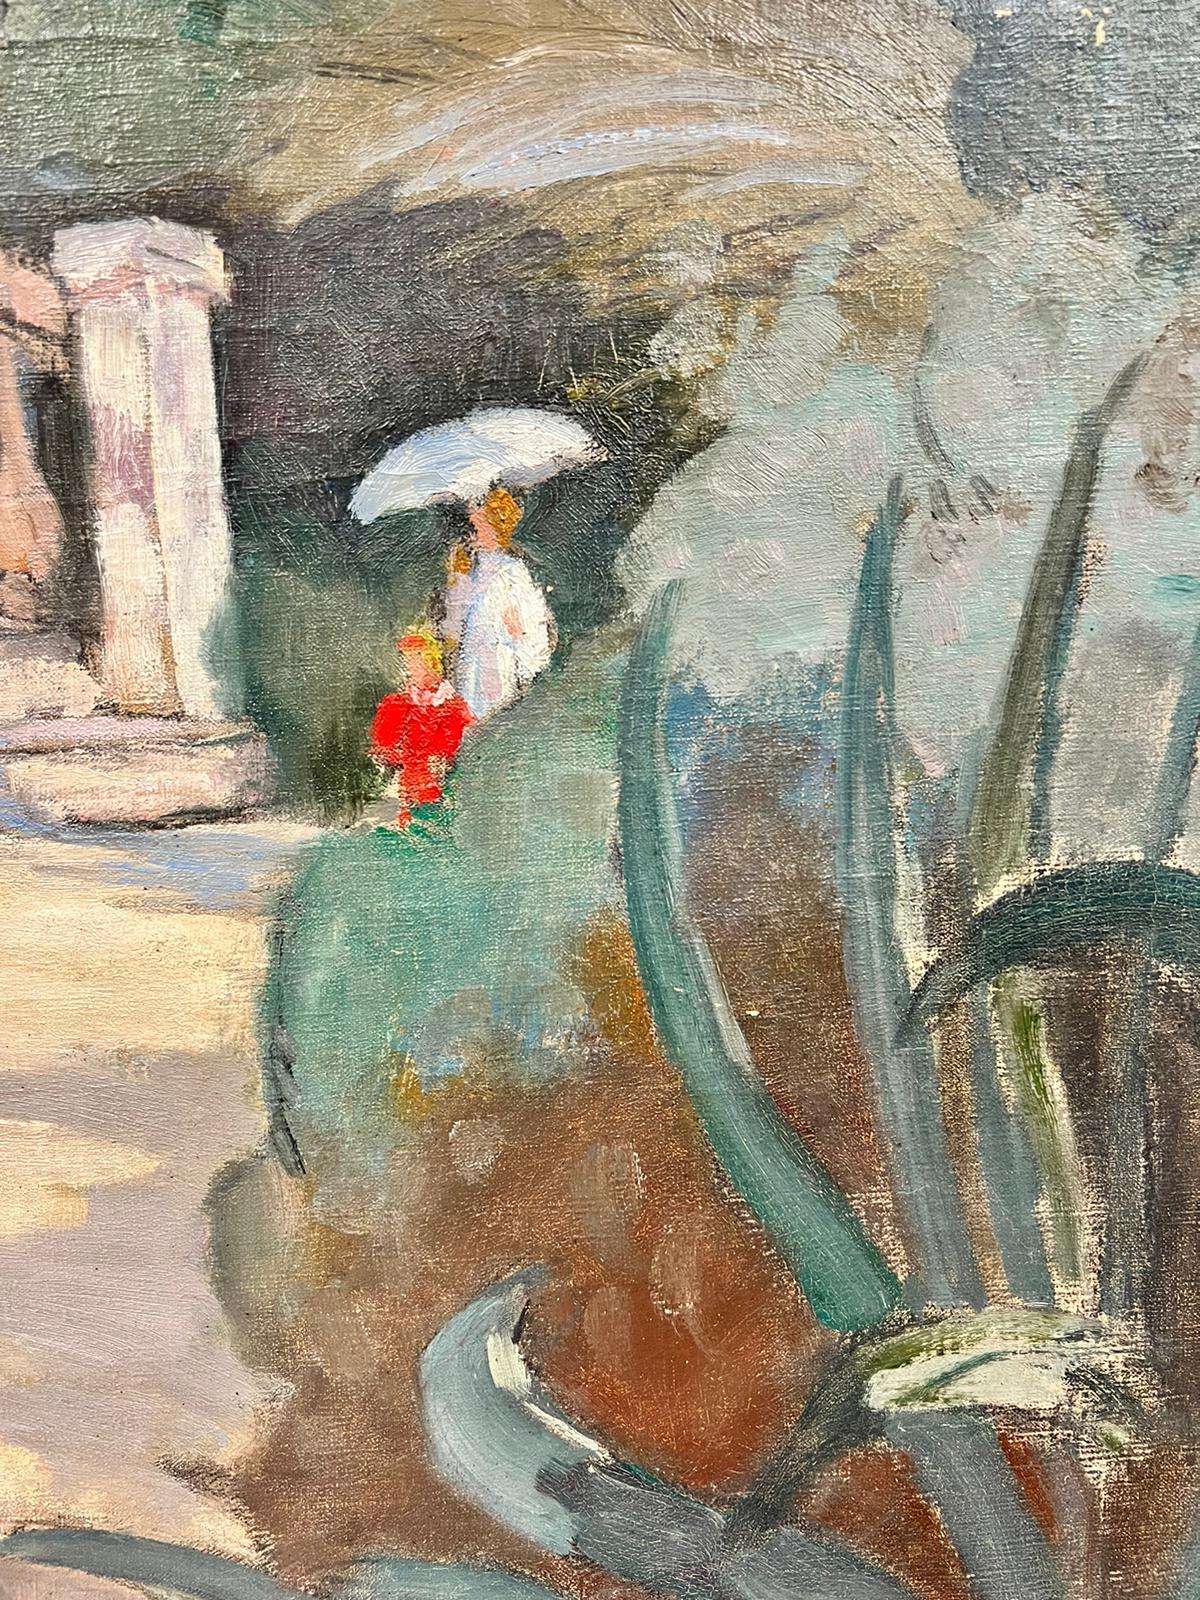 Artist/ School: by Mathilde ARBEY (French 1890-1966), signed lower left corner, atelier stamped verso

Title: Elegant figures walking through a warm garden (most likely in the South of France), sheltering under a parasol. 

Medium: oil on canvas,